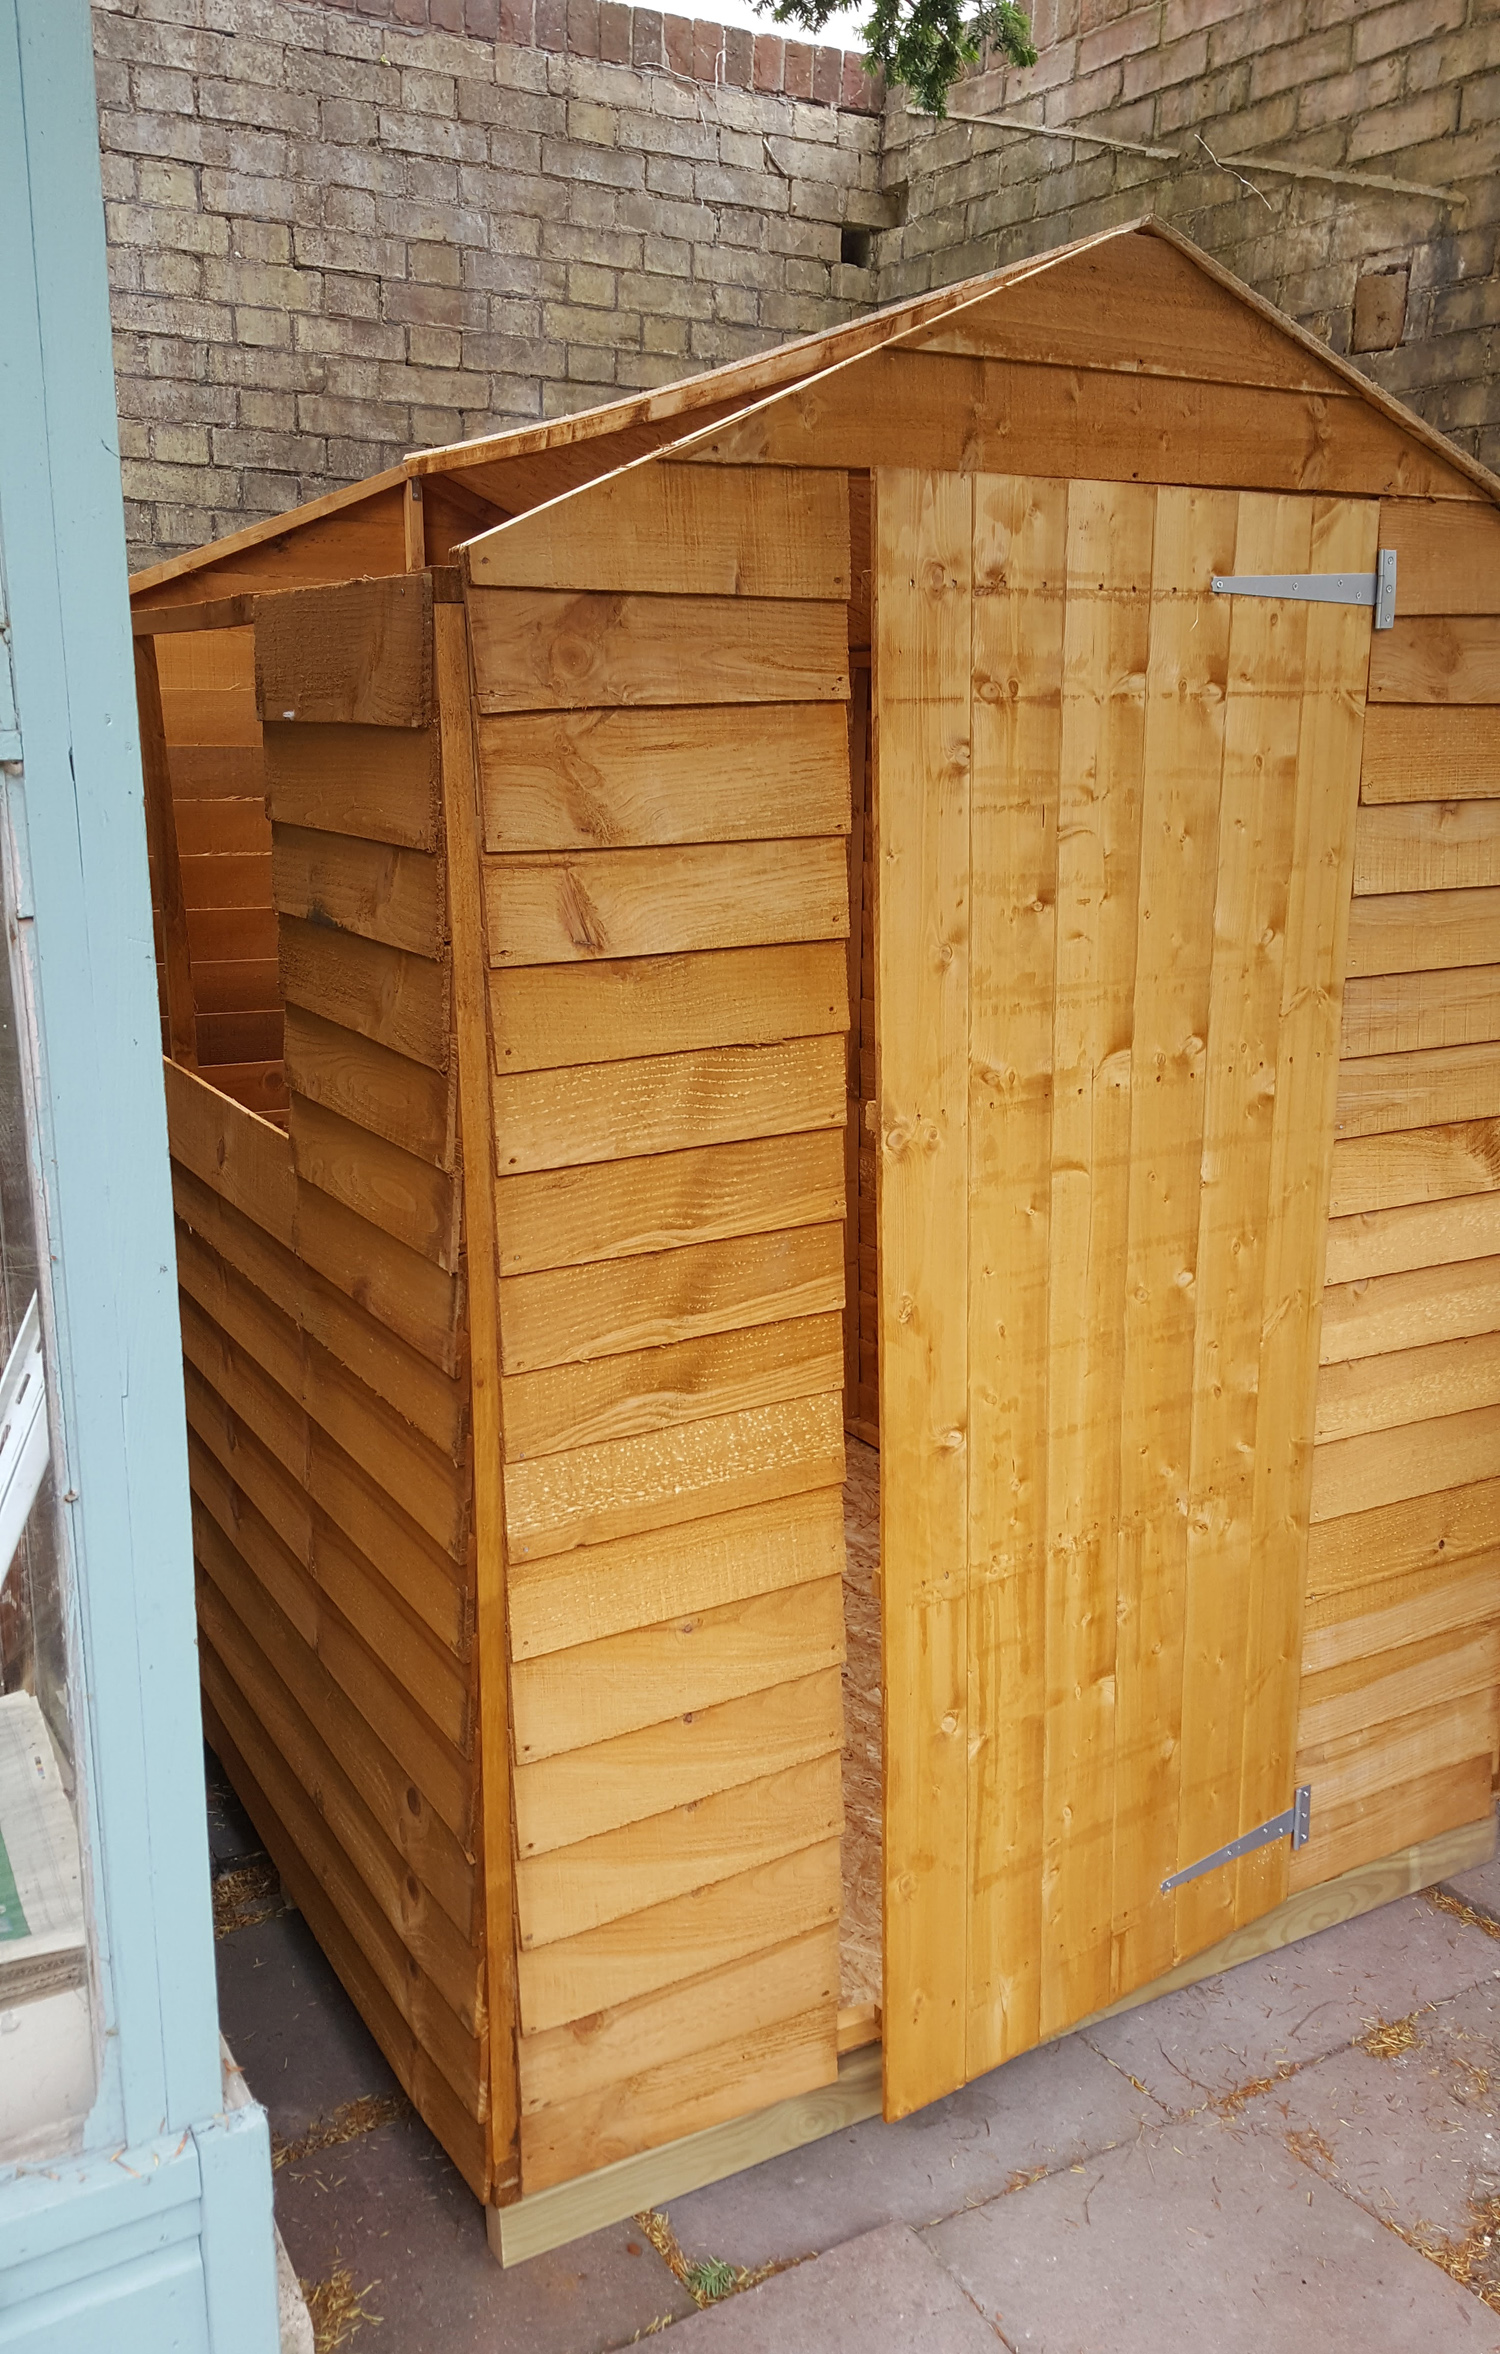 new shed - shell done